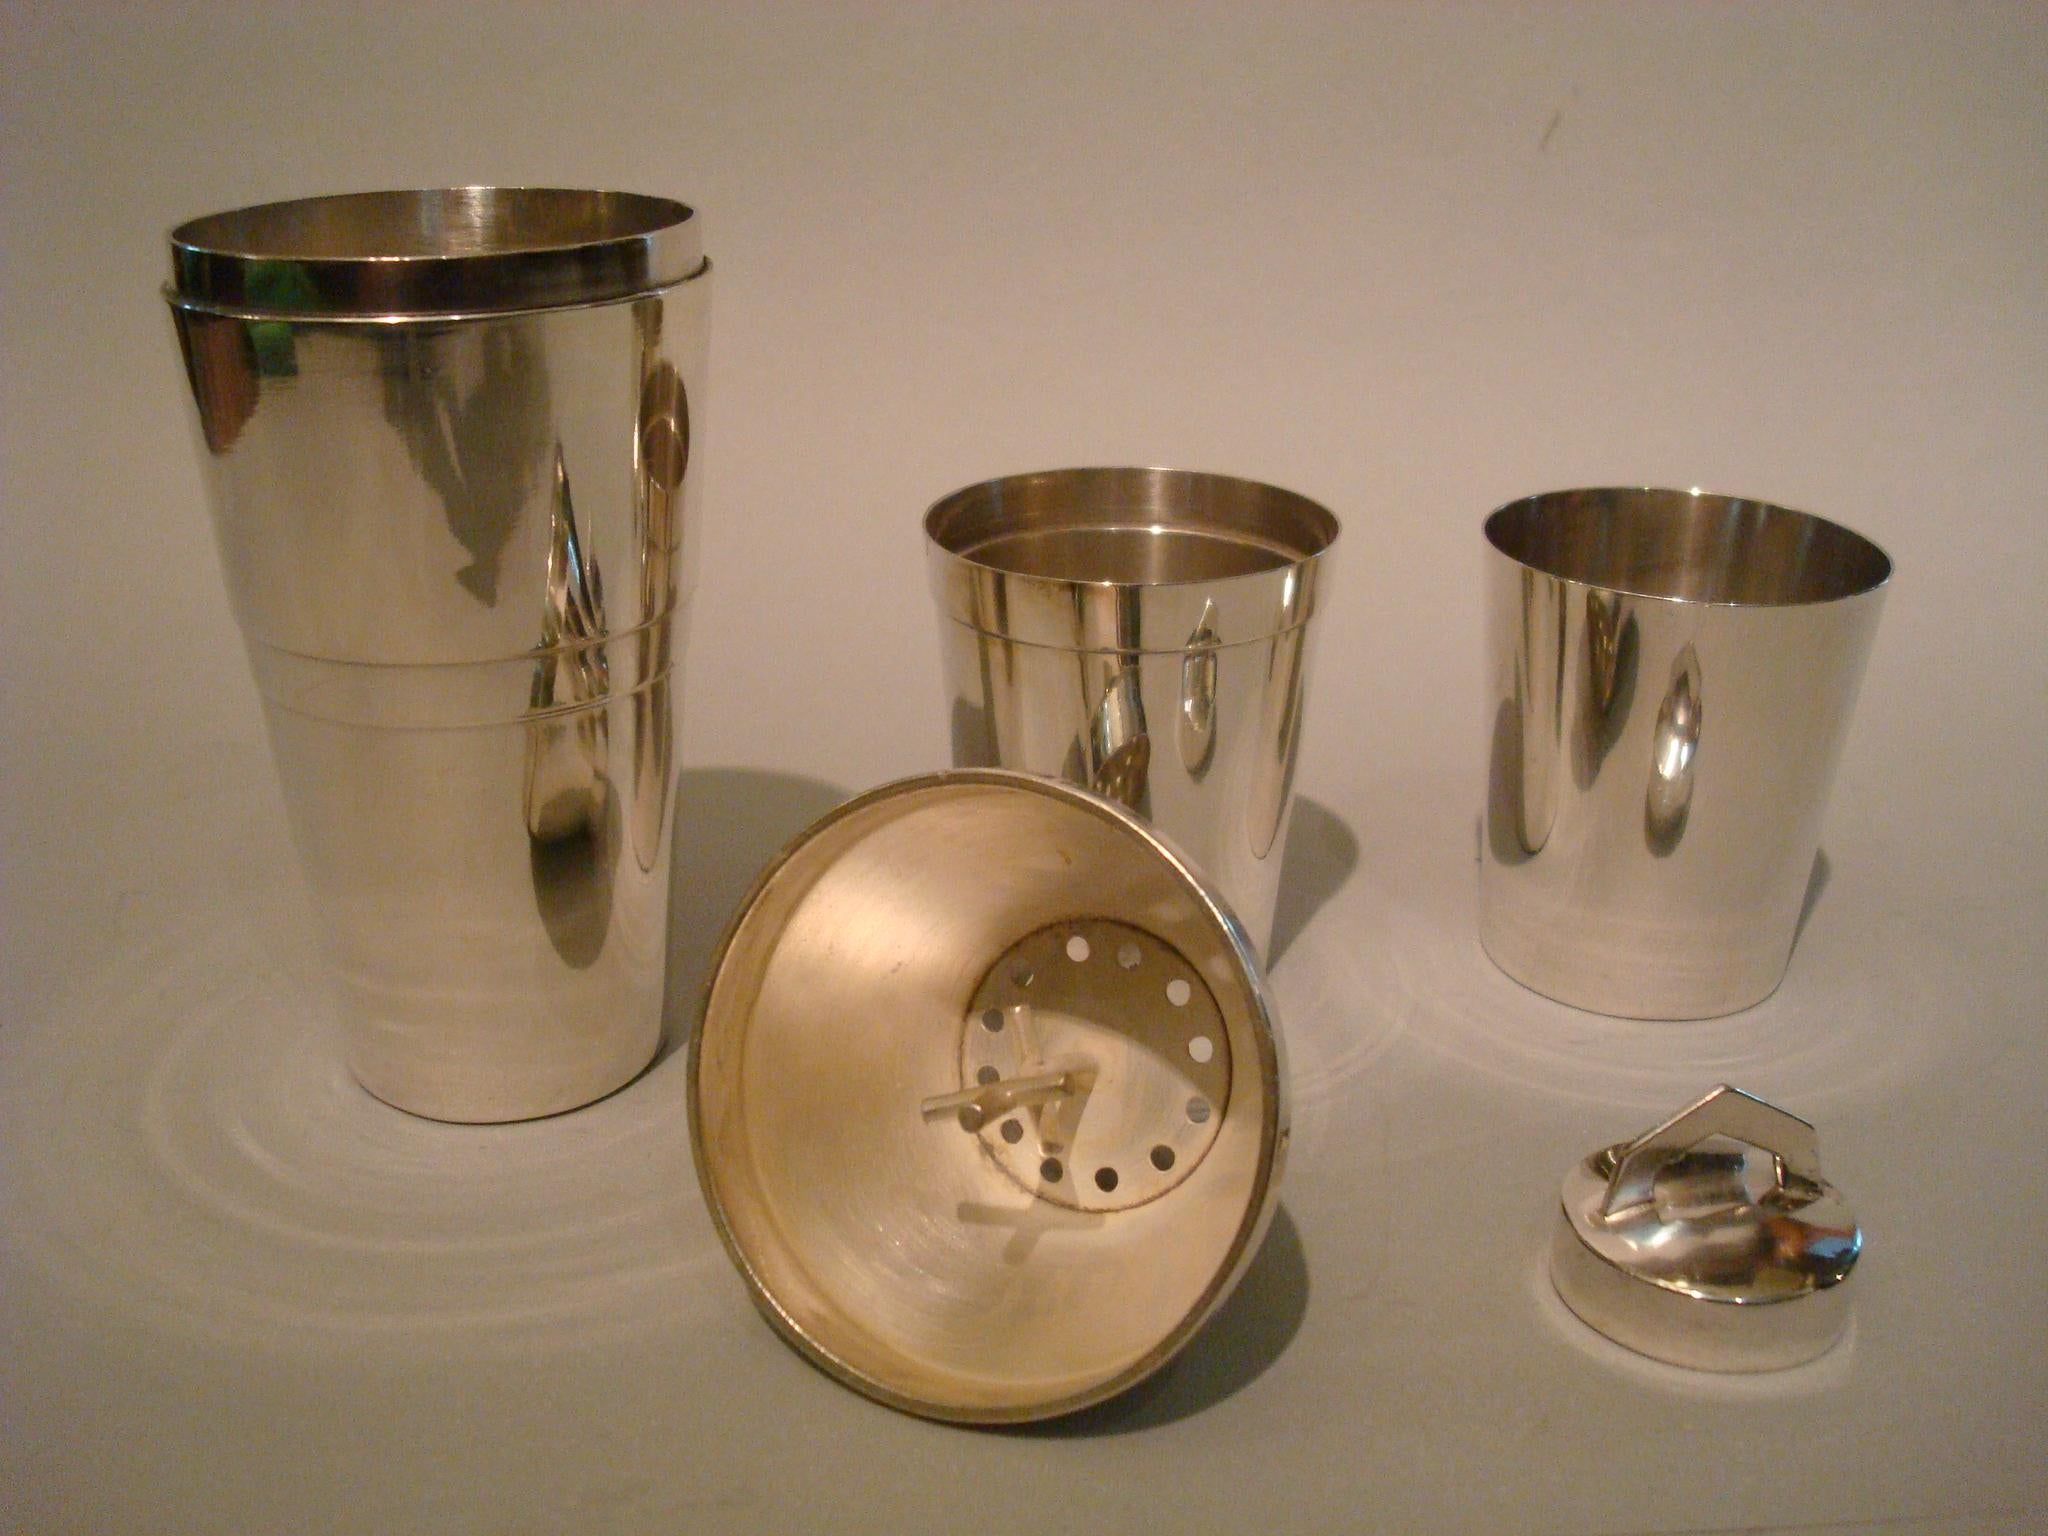 Brass Art Deco Hermes Paris Travel Cocktail Shaker with two goblets, 1930, France